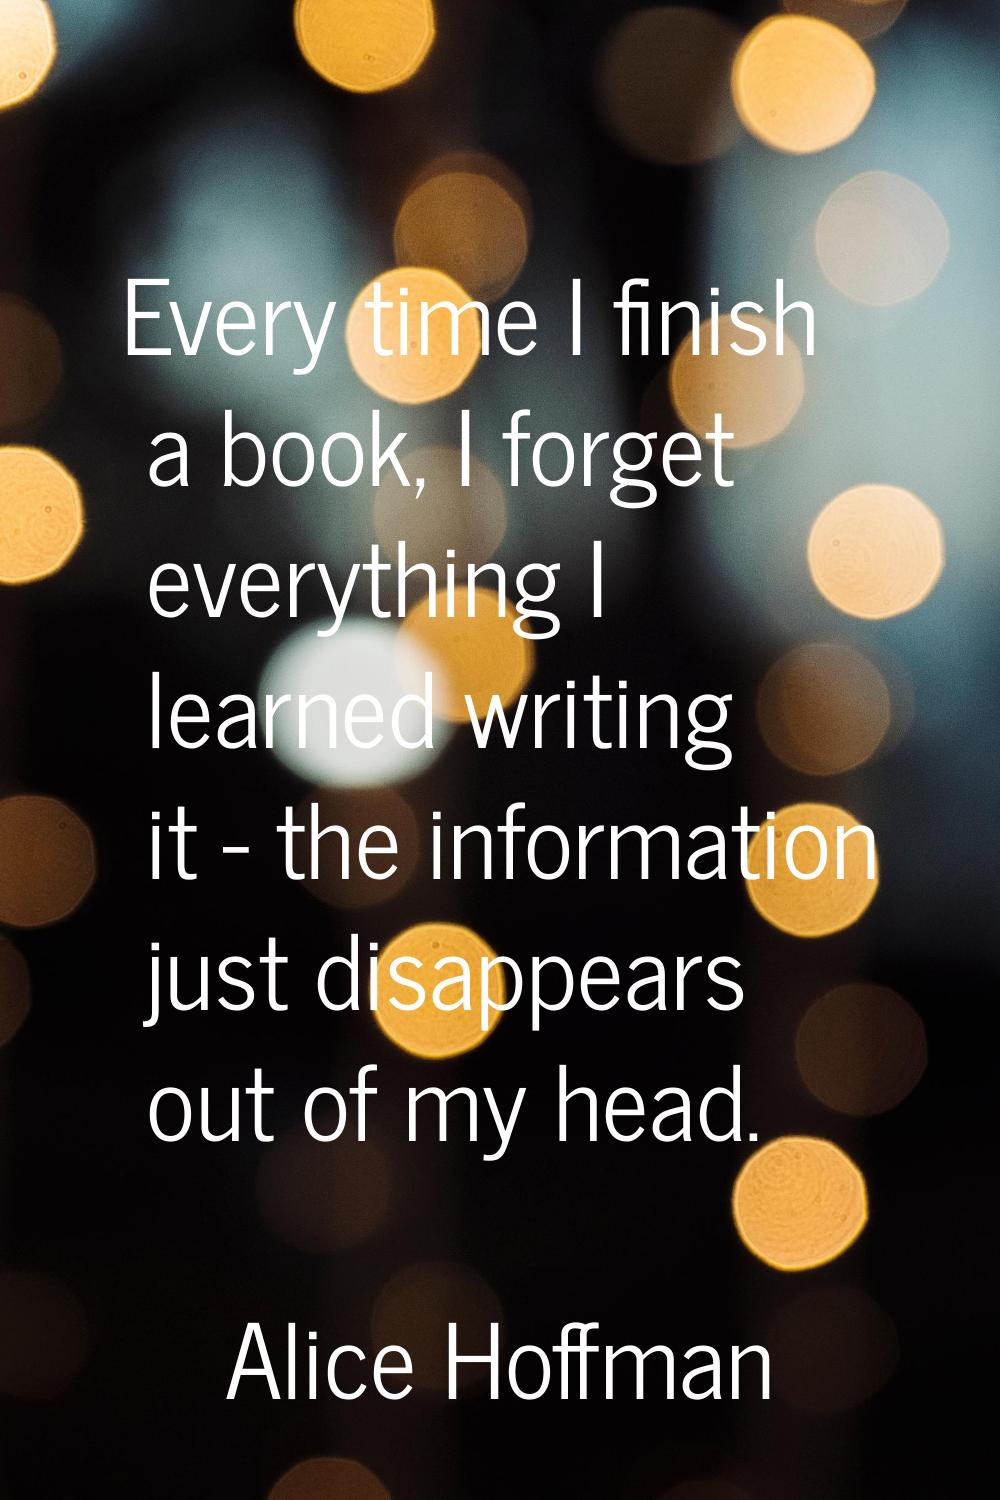 Every time I finish a book, I forget everything I learned writing it - the information just disappe